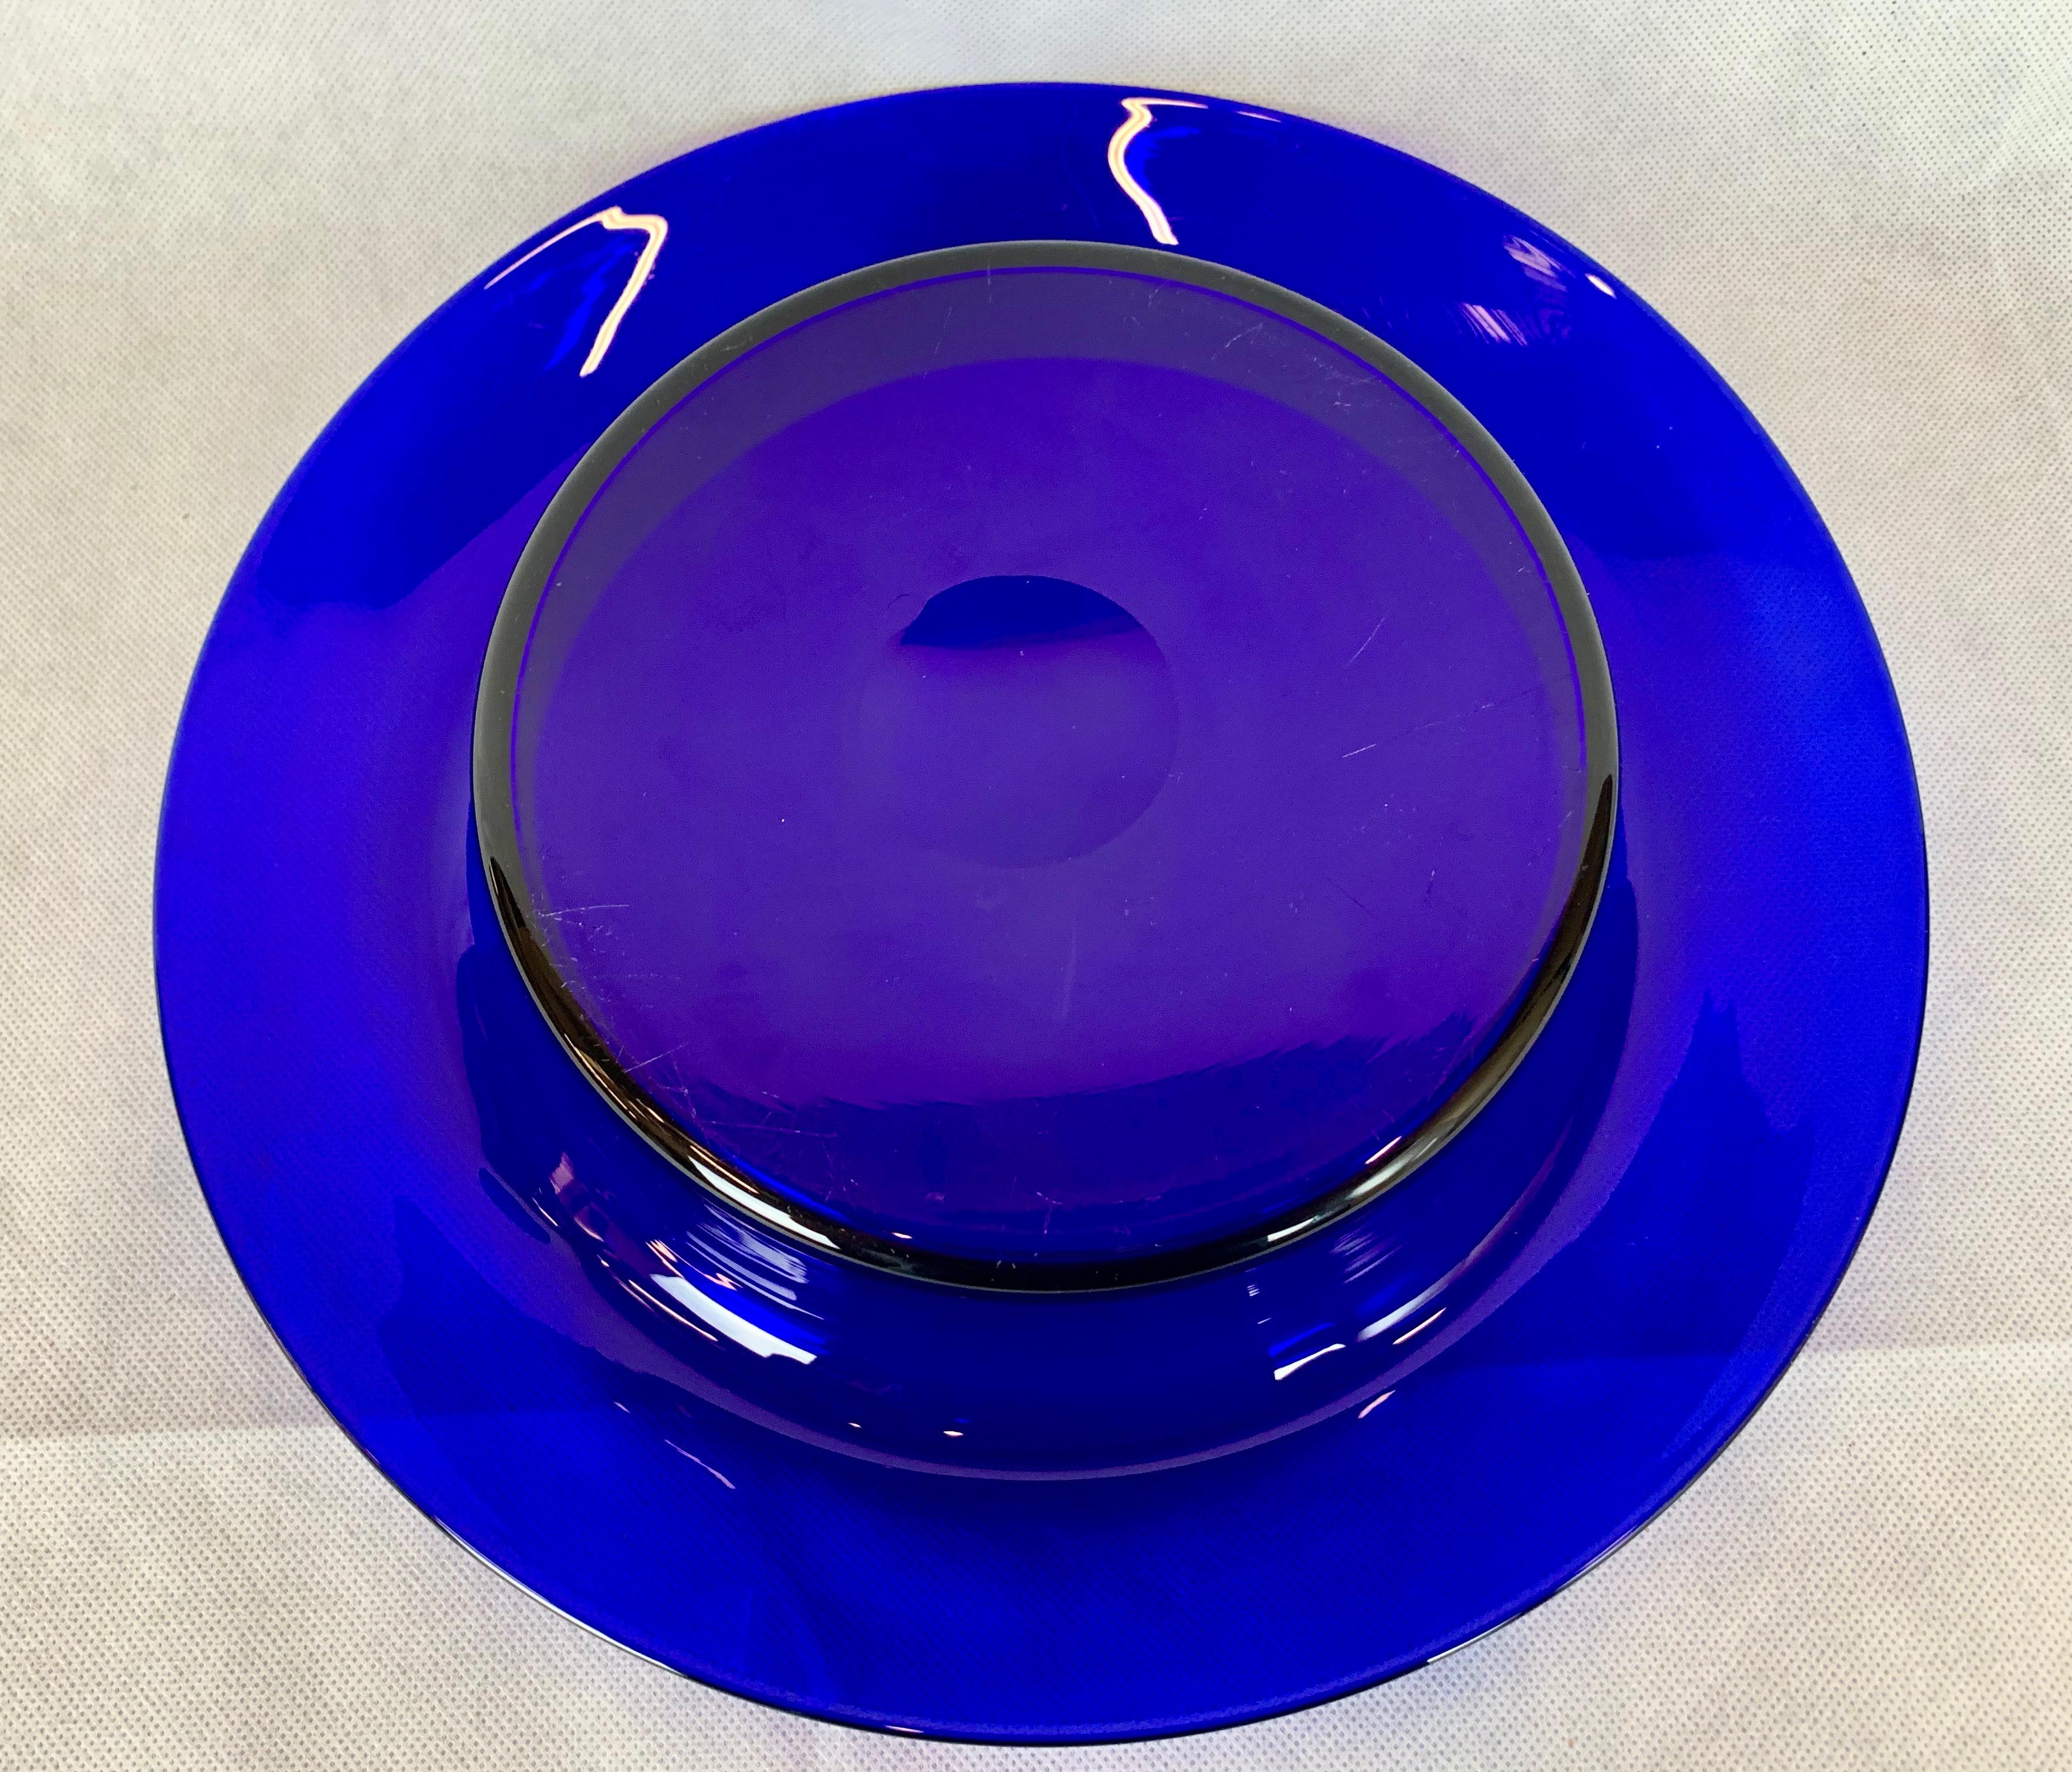 Pairpoint type cobalt blue glass bowl with everted rim. This piece has been hand blown and is evidenced by the polished pontil on the base. These bowls were popular in the United States from 1900-1930. The bowl has been photographed on a white